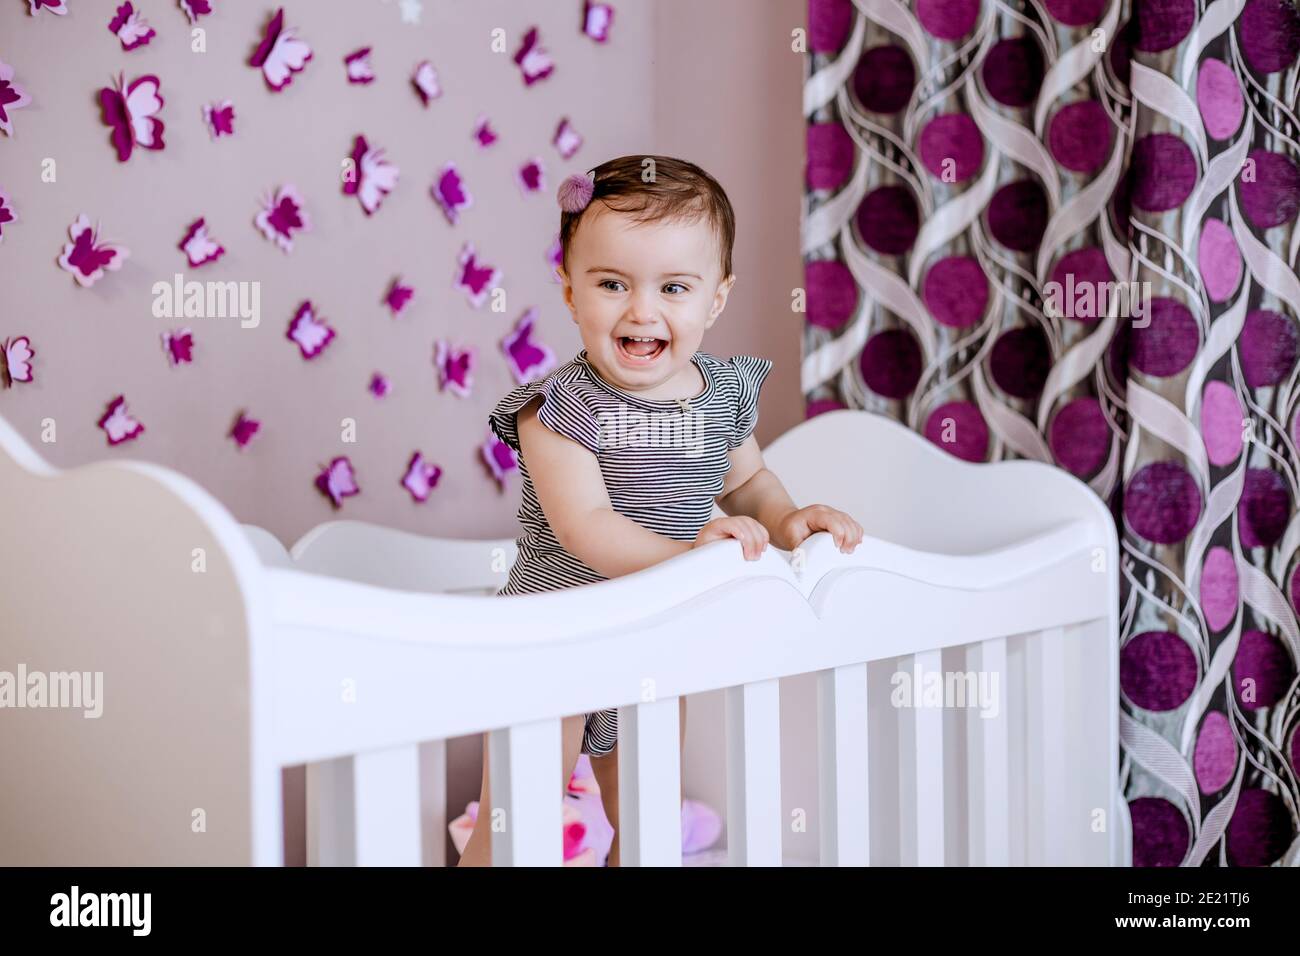 Cute, adorable baby enjoying her childhood in her crib. Nice deocrated bedroom with lots of butterflies Stock Photo